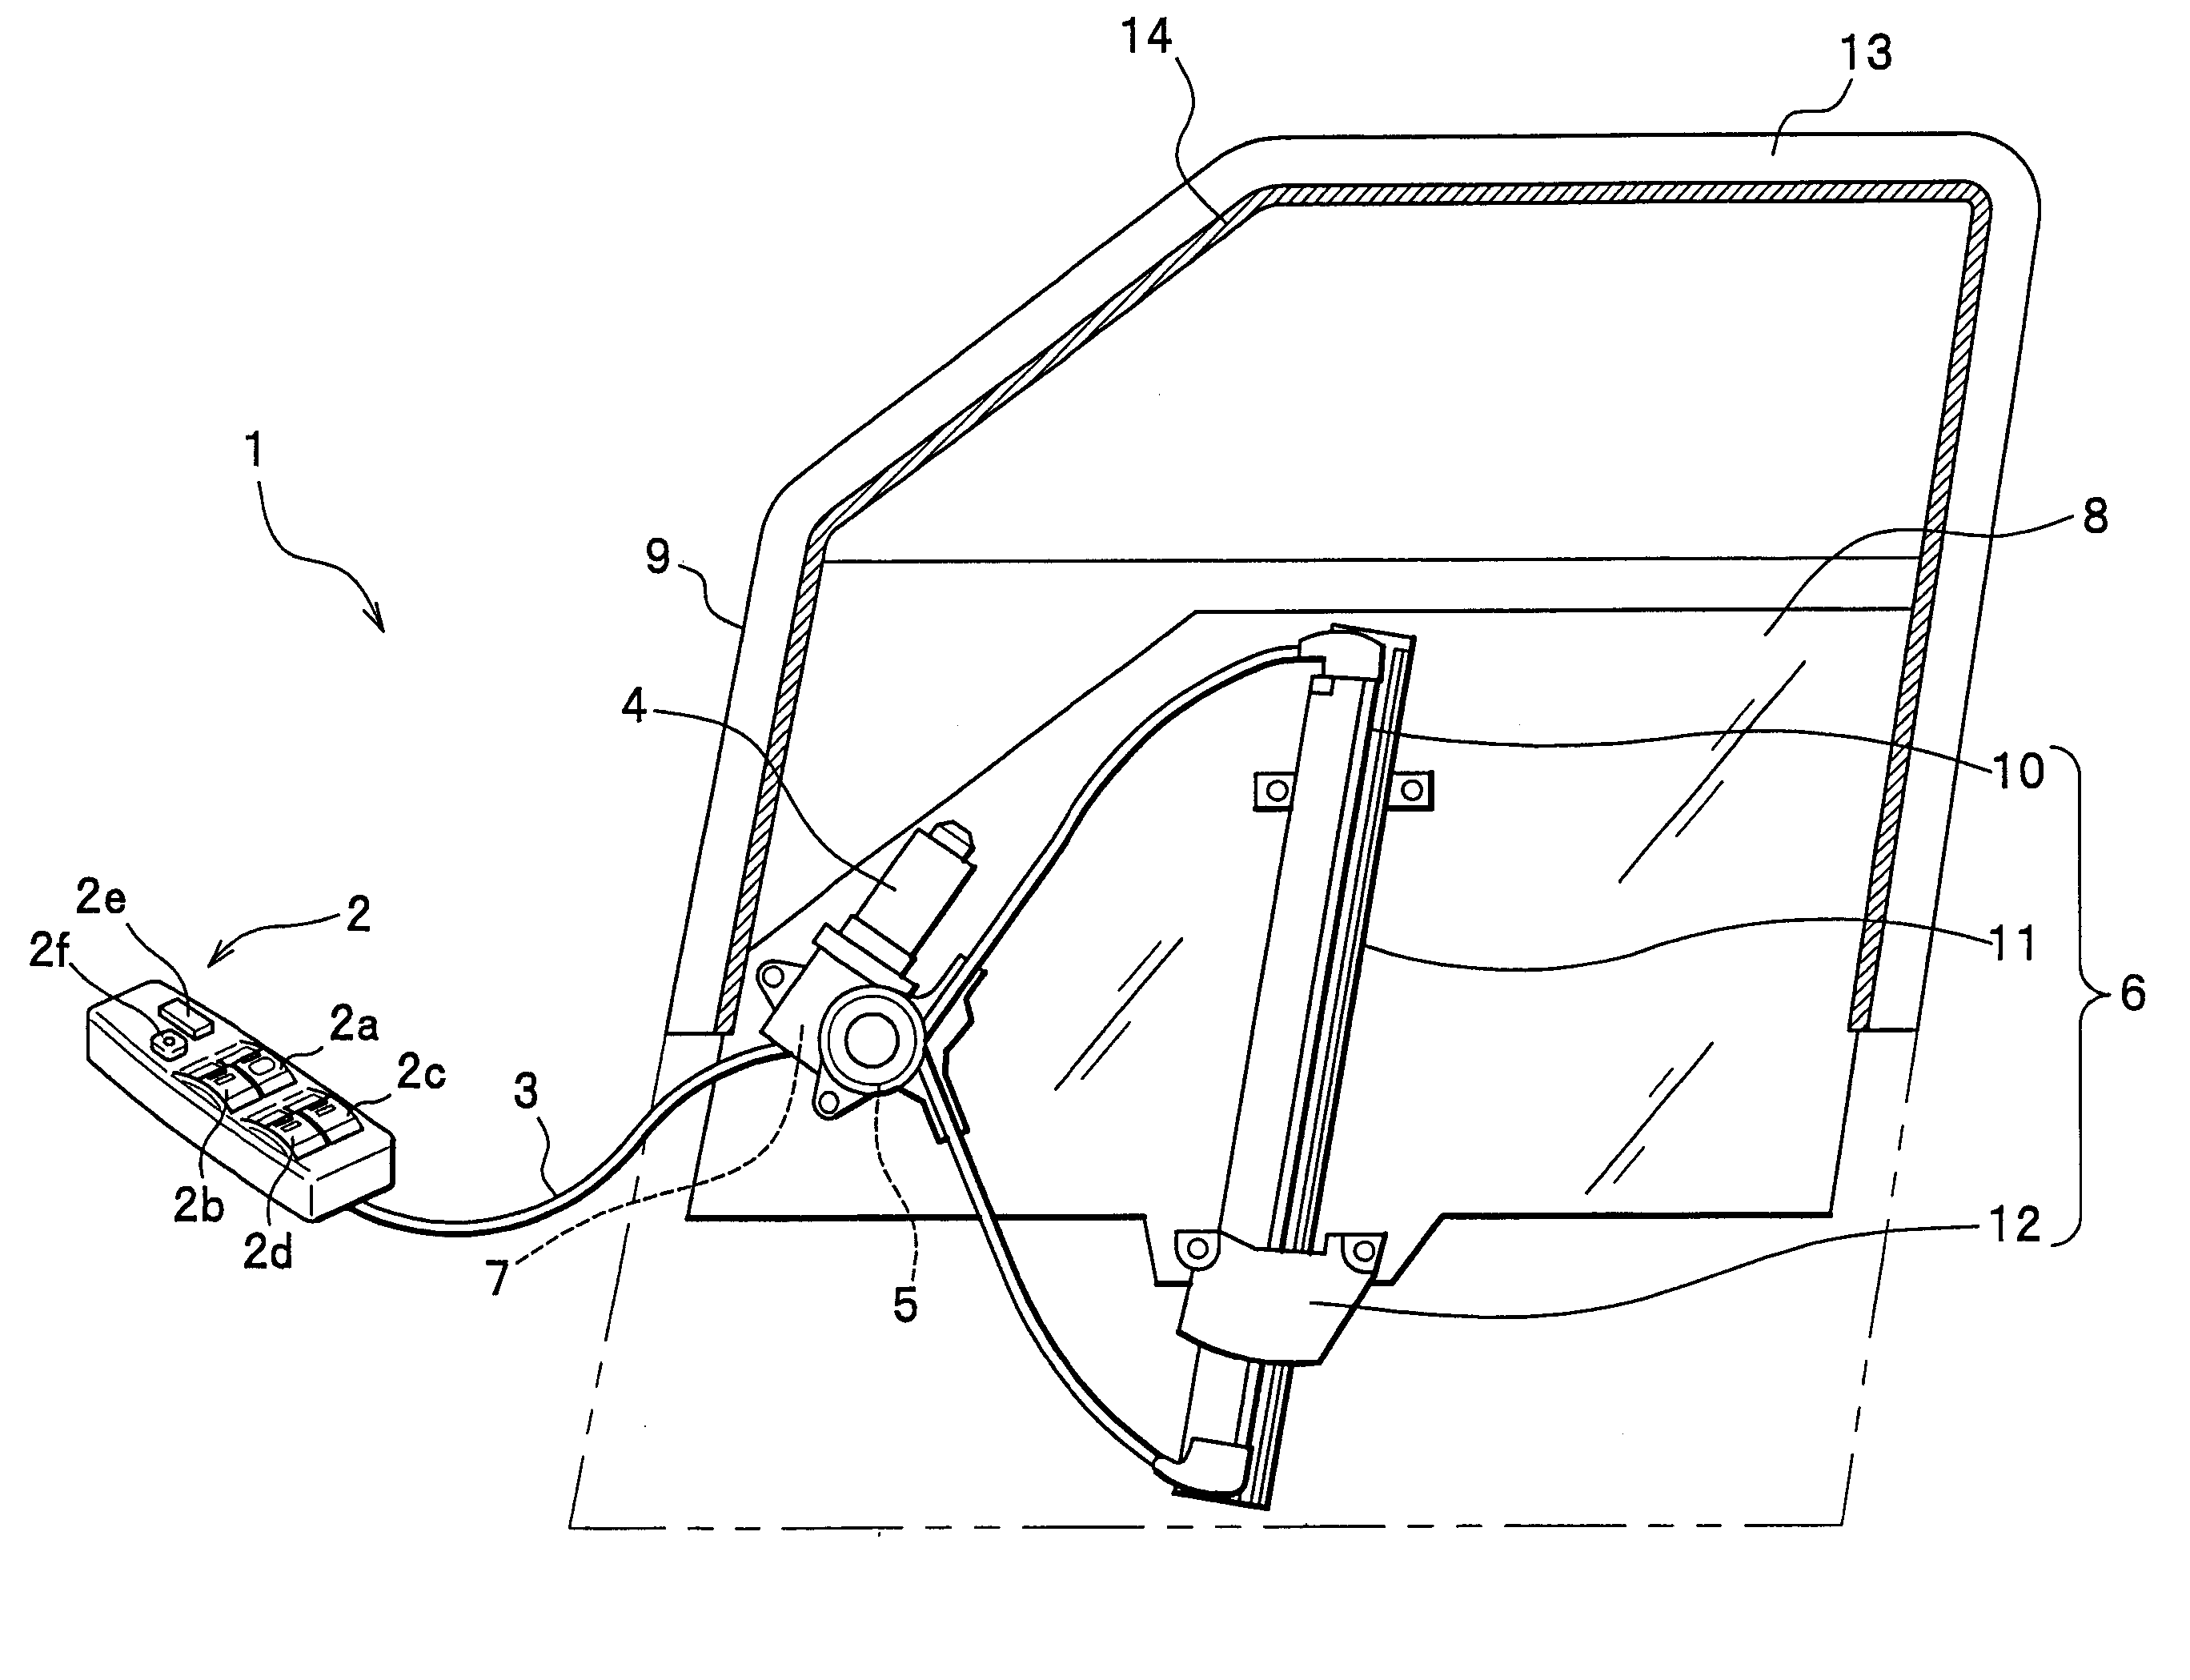 Power window system and method for controlling power-operated window